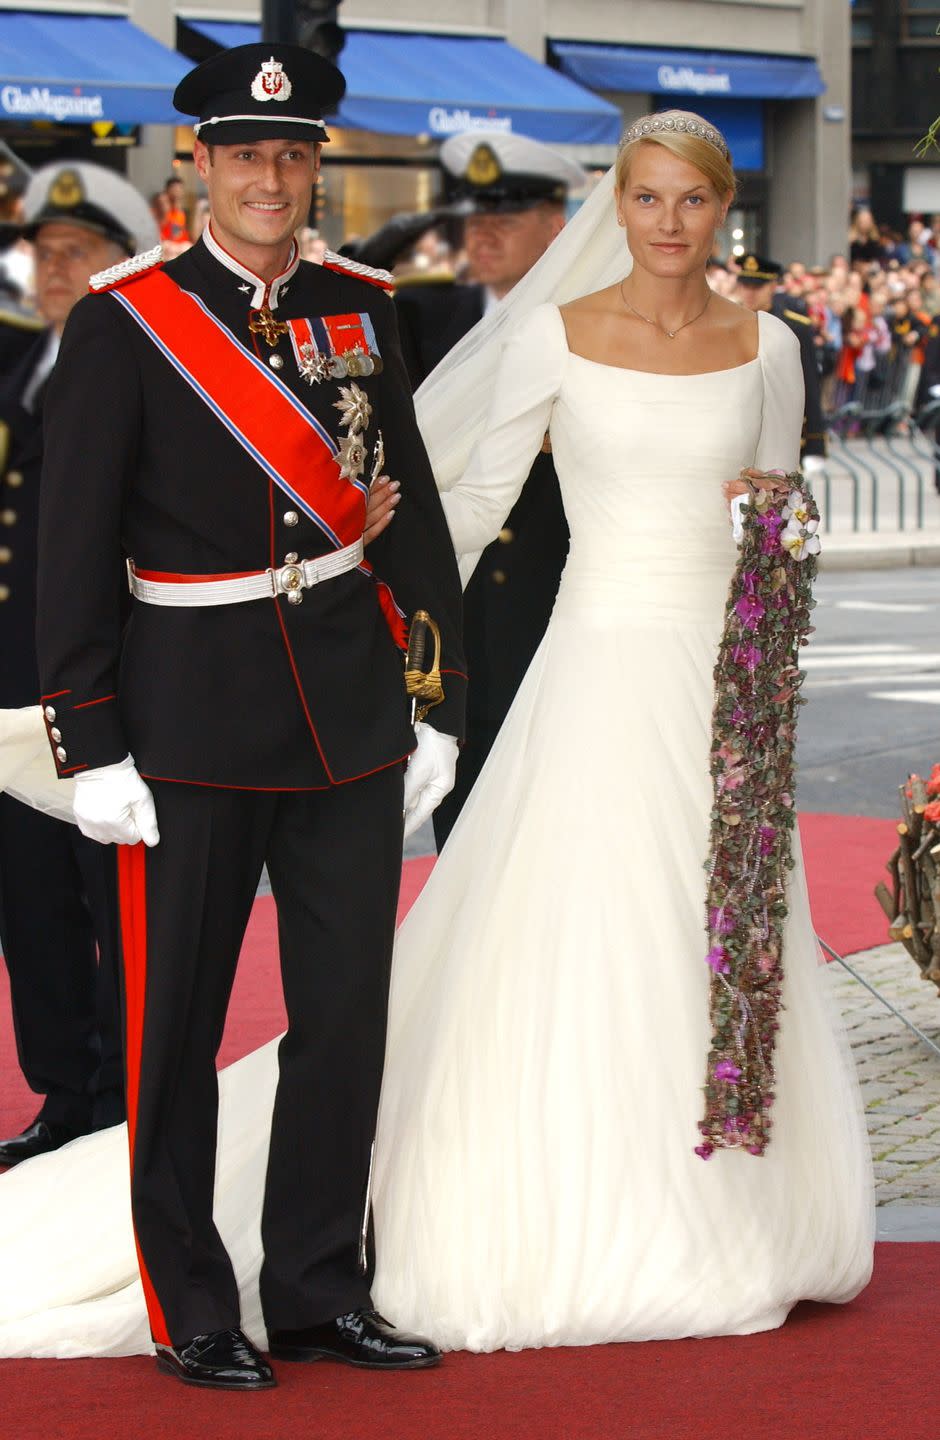 <p>The Crown Prince of Norway married Mette-Marit Tjessem Høiby in August 2001 at Oslo's Cathedral. After a scandalous engagement, due to Mette-Marit's party girl past, the Prince decided to walk his bride down the aisle as a sign of support. </p>